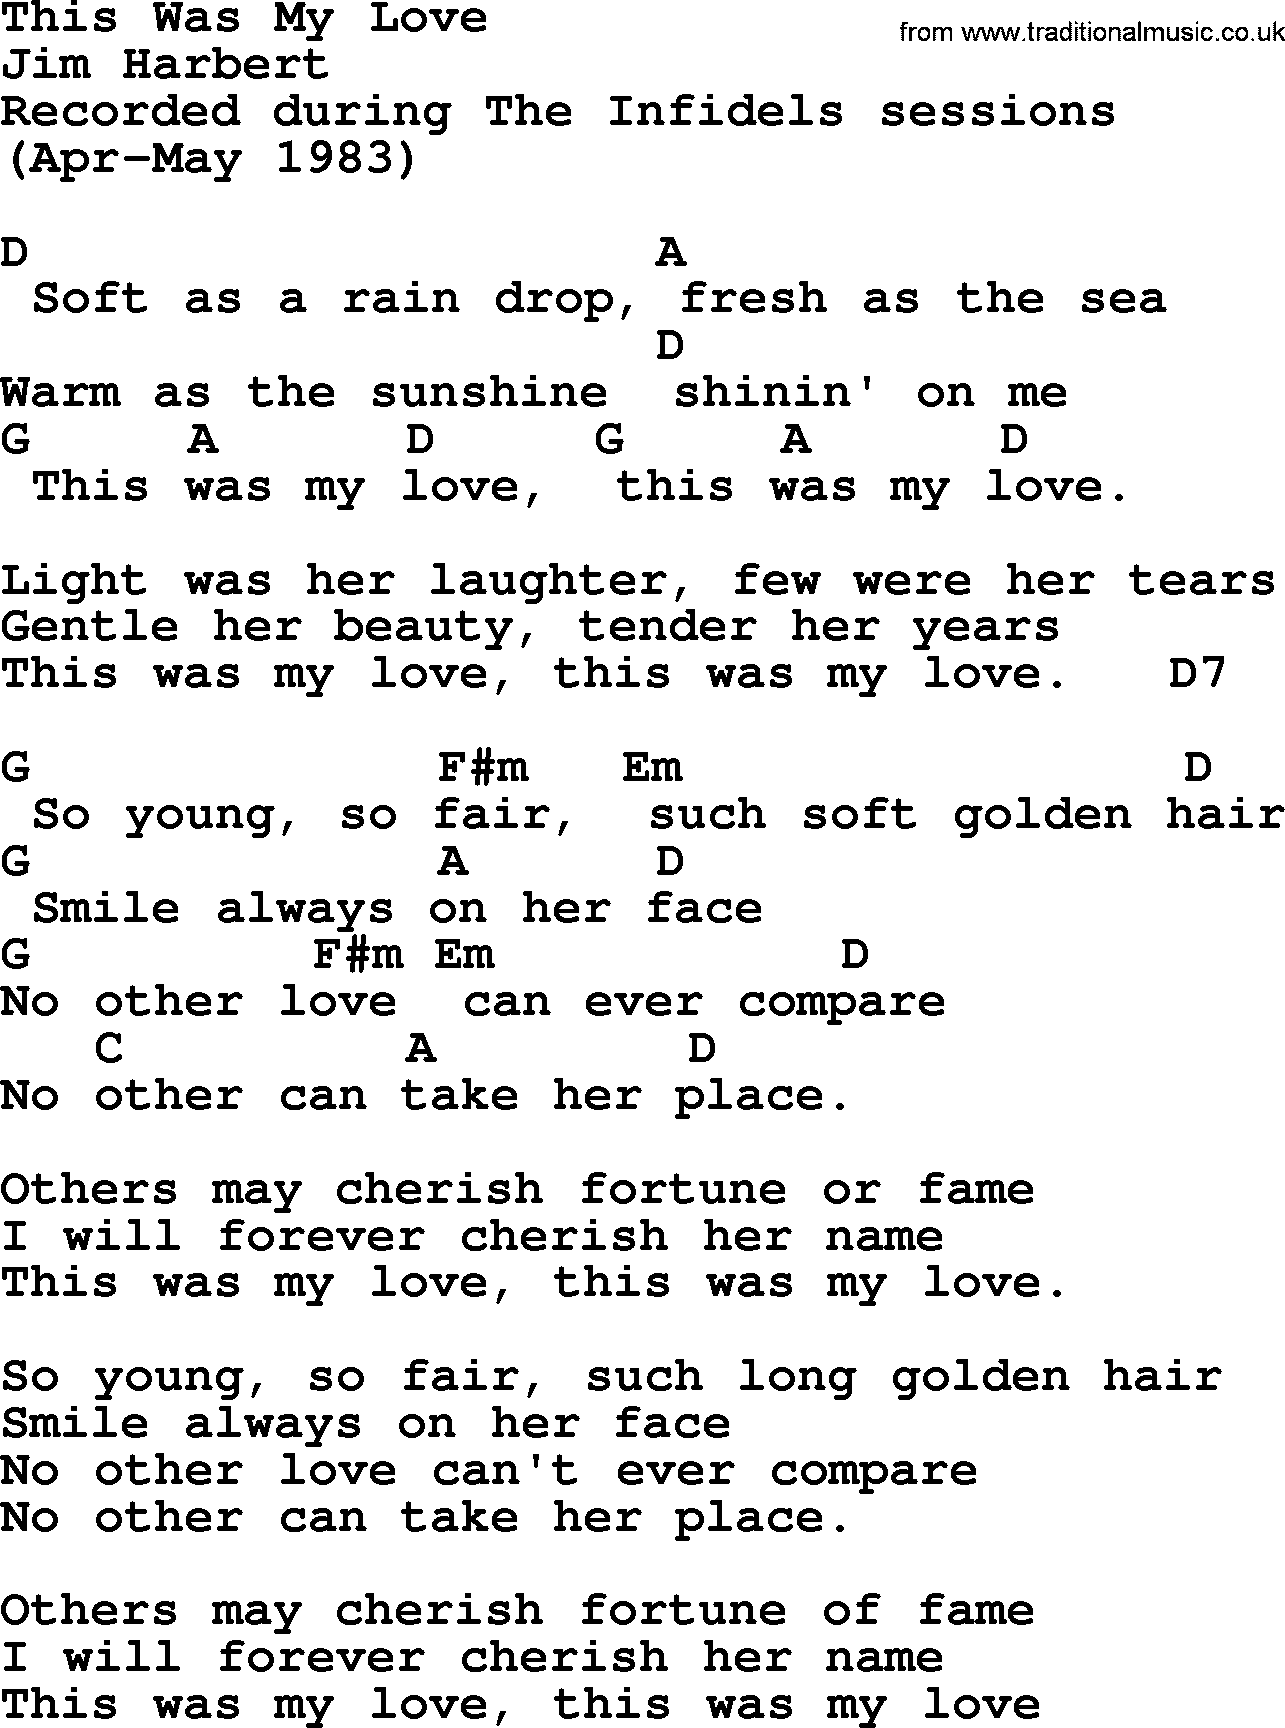 Bob Dylan song, lyrics with chords - This Was My Love